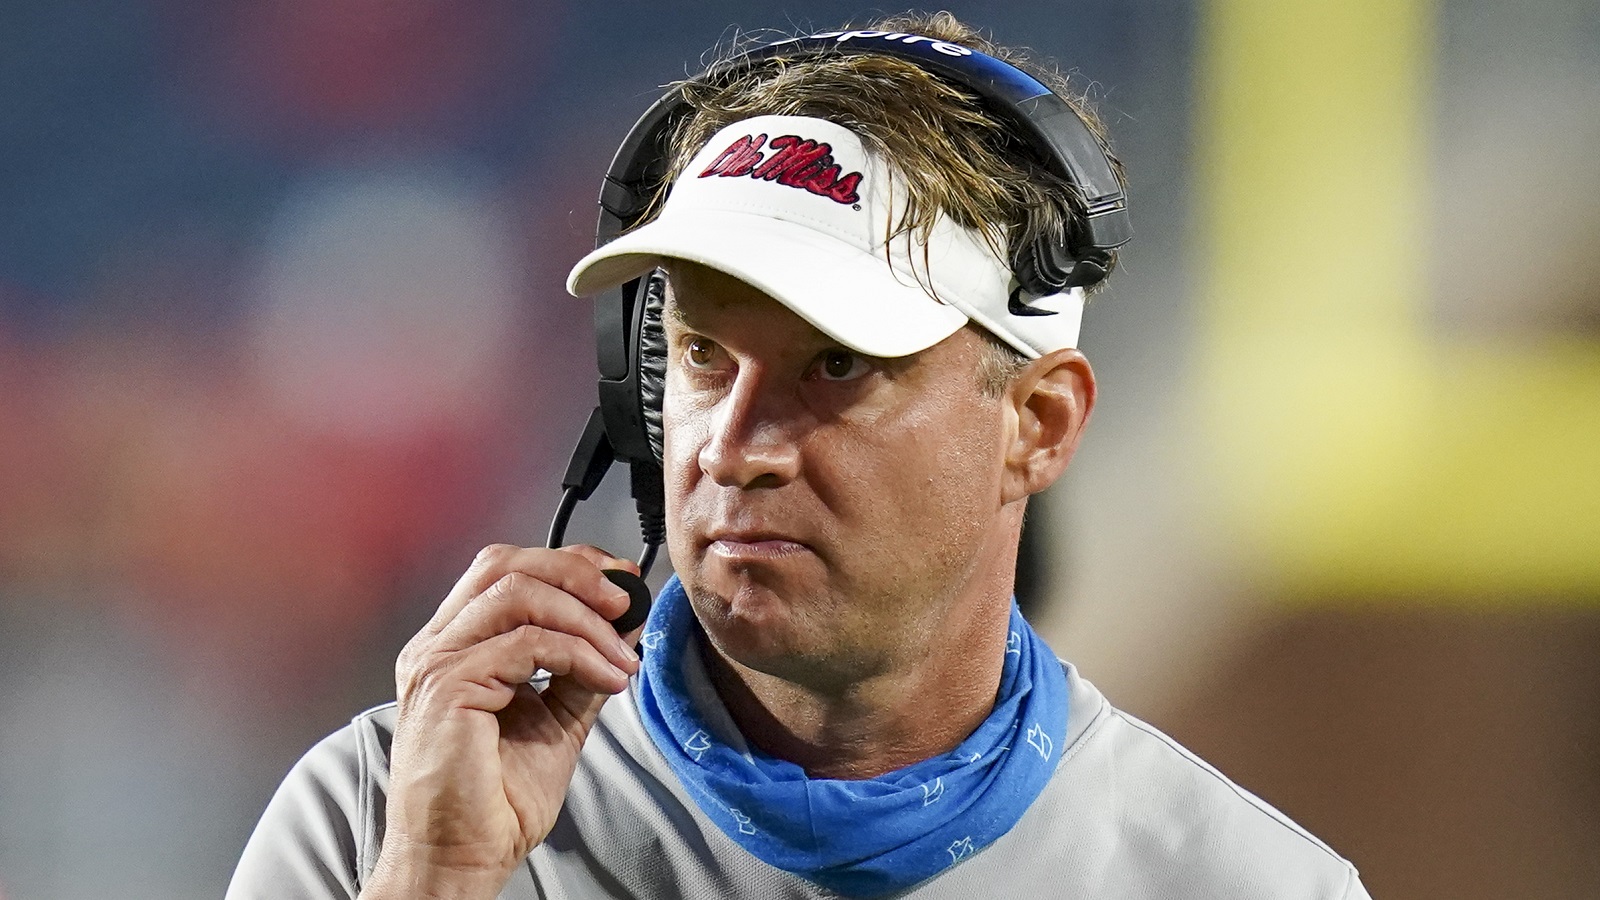 Lane Kiffin offers solution to growing NIL problem